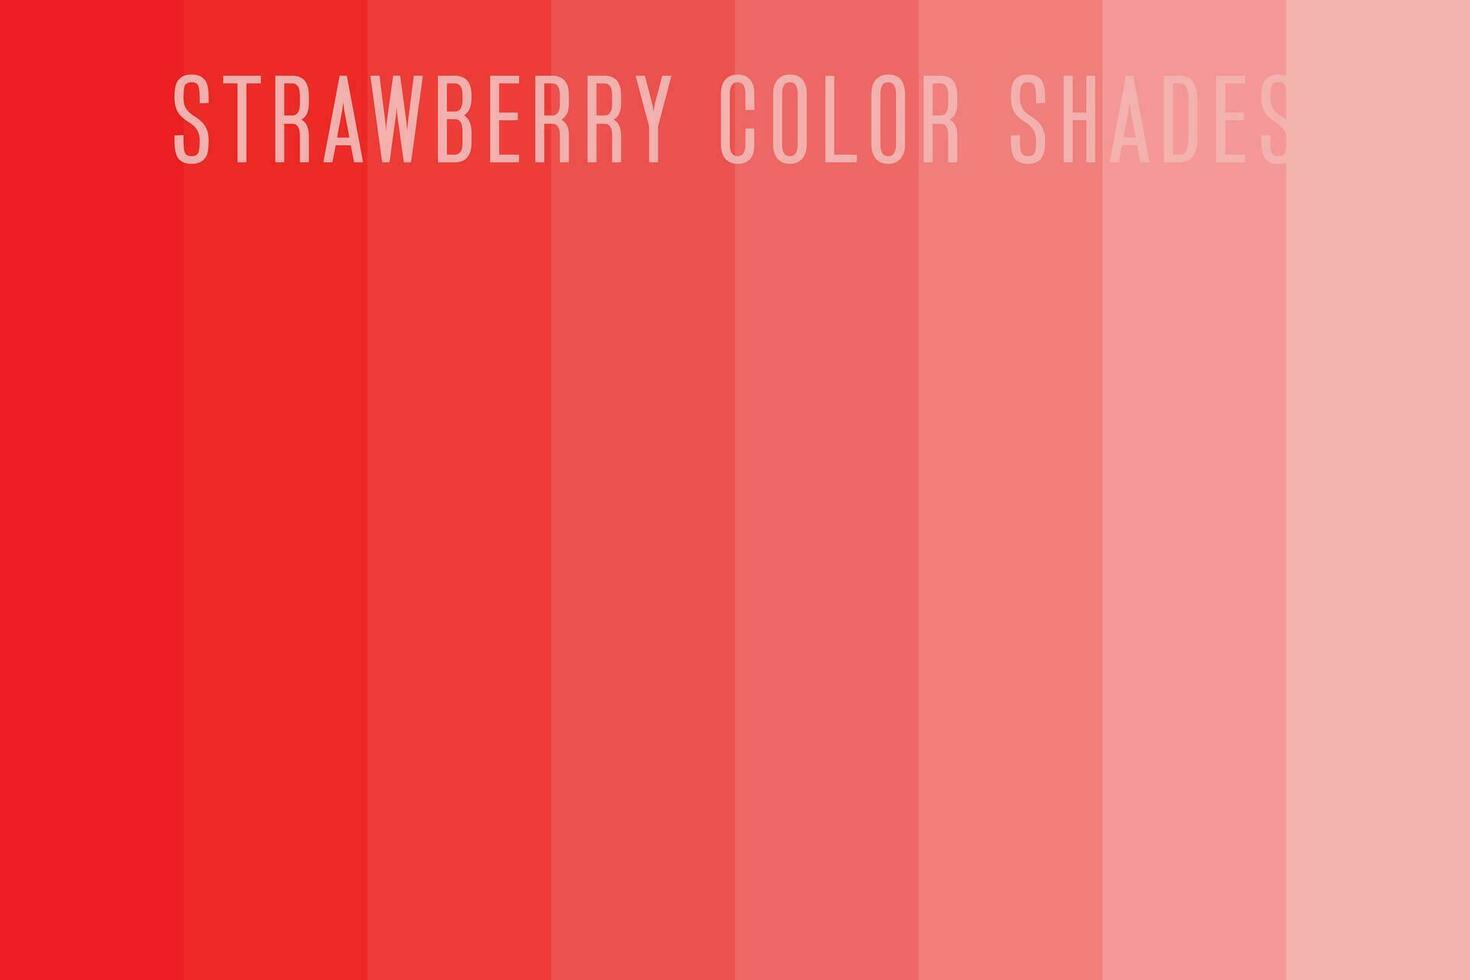 Strawberry color shades, Strawberry color palette vector illustration